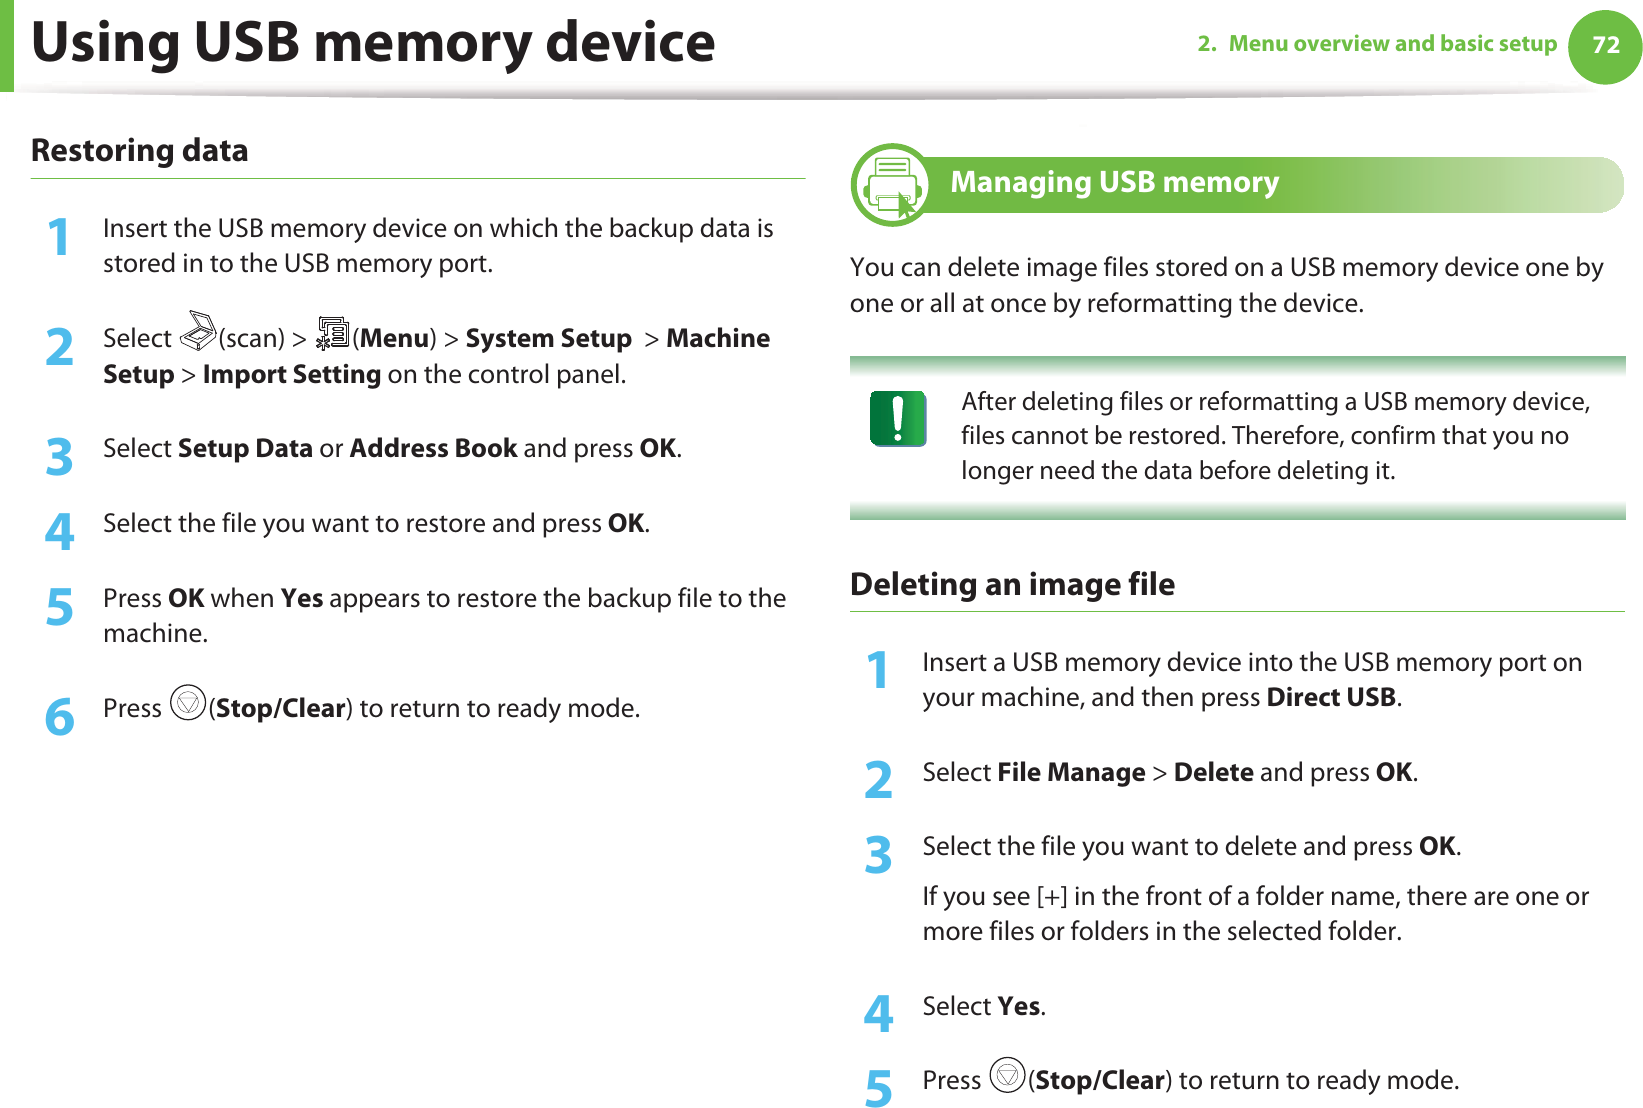 Using USB memory device 722. Menu overview and basic setupRestoring data1Insert the USB memory device on which the backup data is stored in to the USB memory port.2  Select (scan) &gt; (Menu) &gt; System Setup  &gt; Machine Setup &gt; Import Setting on the control panel.3  Select Setup Data or Address Book and press OK. 4  Select the file you want to restore and press OK.5  Press OK when Yes appears to restore the backup file to the machine.6  Press (Stop/Clear) to return to ready mode.27 Managing USB memoryYou can delete image files stored on a USB memory device one by one or all at once by reformatting the device. After deleting files or reformatting a USB memory device, files cannot be restored. Therefore, confirm that you no longer need the data before deleting it. Deleting an image file1Insert a USB memory device into the USB memory port on your machine, and then press Direct USB.2  Select File Manage &gt; Delete and press OK.3  Select the file you want to delete and press OK.If you see [+] in the front of a folder name, there are one or more files or folders in the selected folder.4  Select Yes.5  Press (Stop/Clear) to return to ready mode.